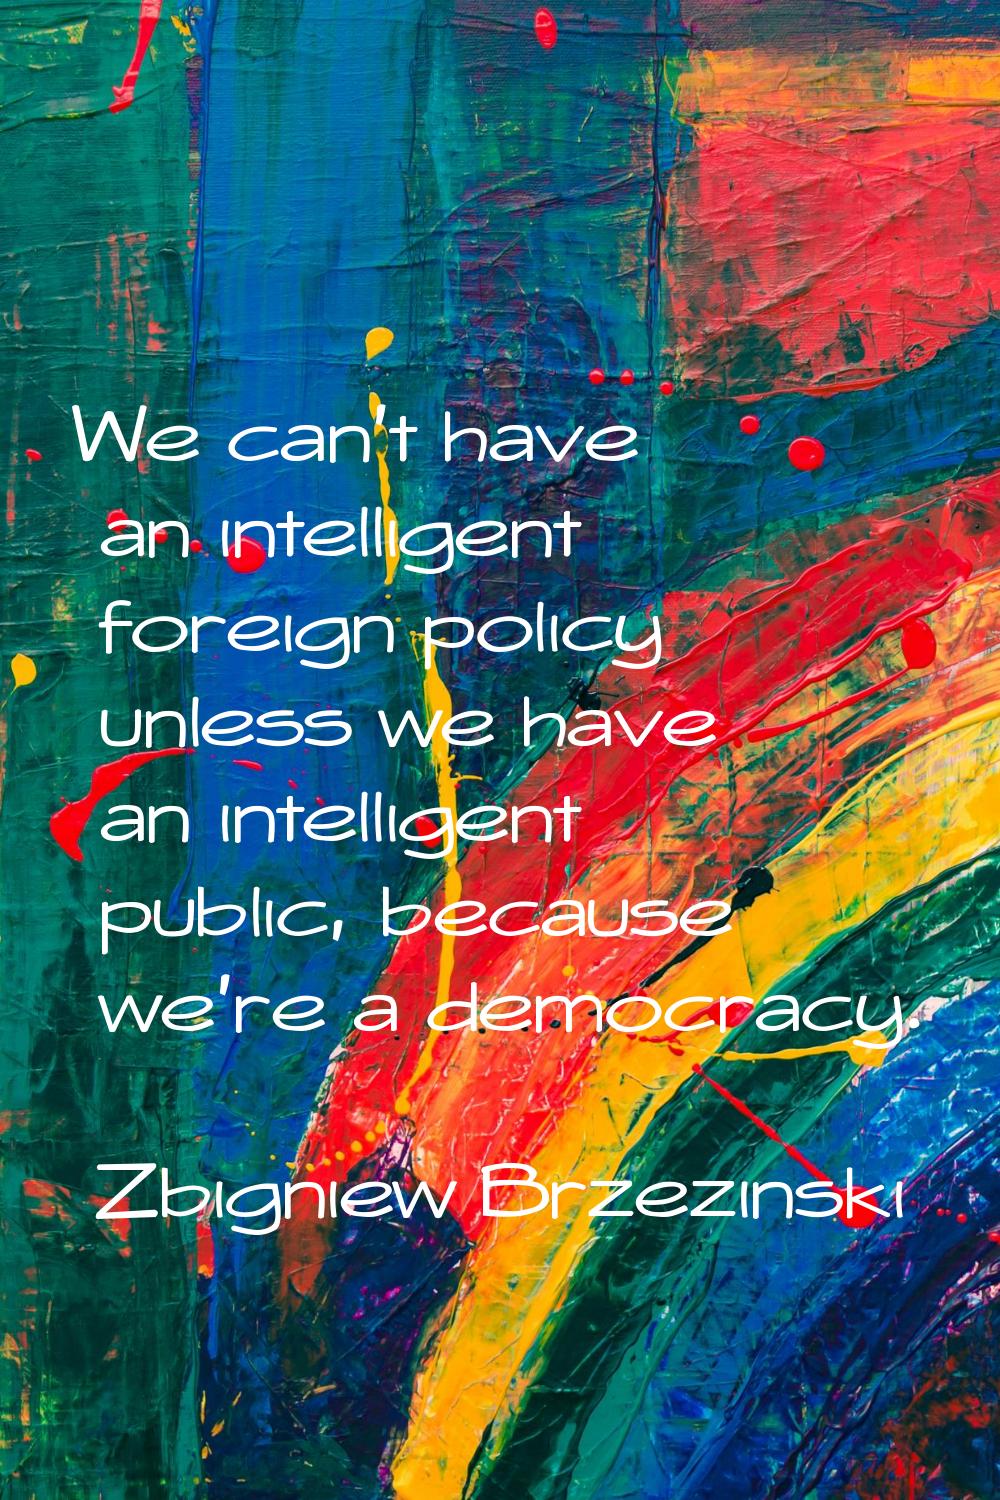 We can't have an intelligent foreign policy unless we have an intelligent public, because we're a d